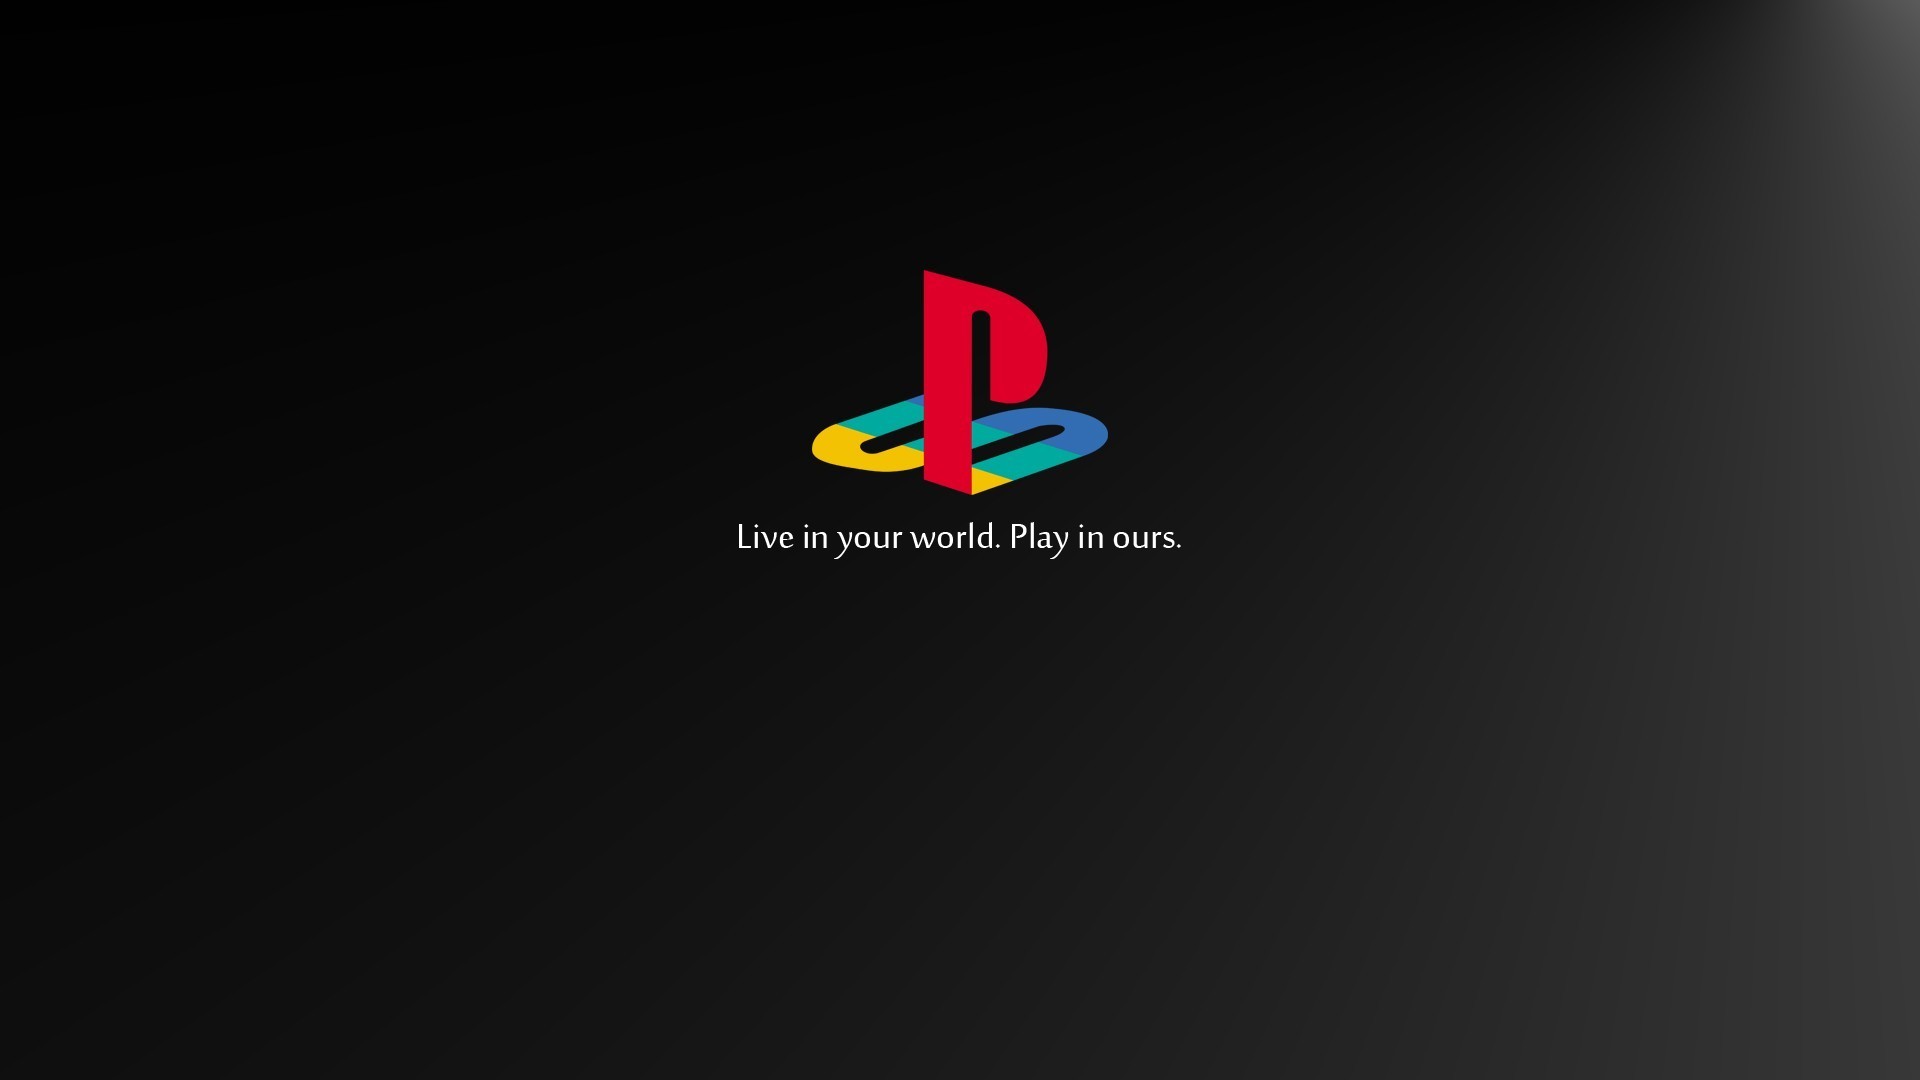 PlayStation, Retro Games, Video Games, Logo, Sony, Black, Consoles, Console Wallpapers HD / Desktop and Mobile Backgrounds